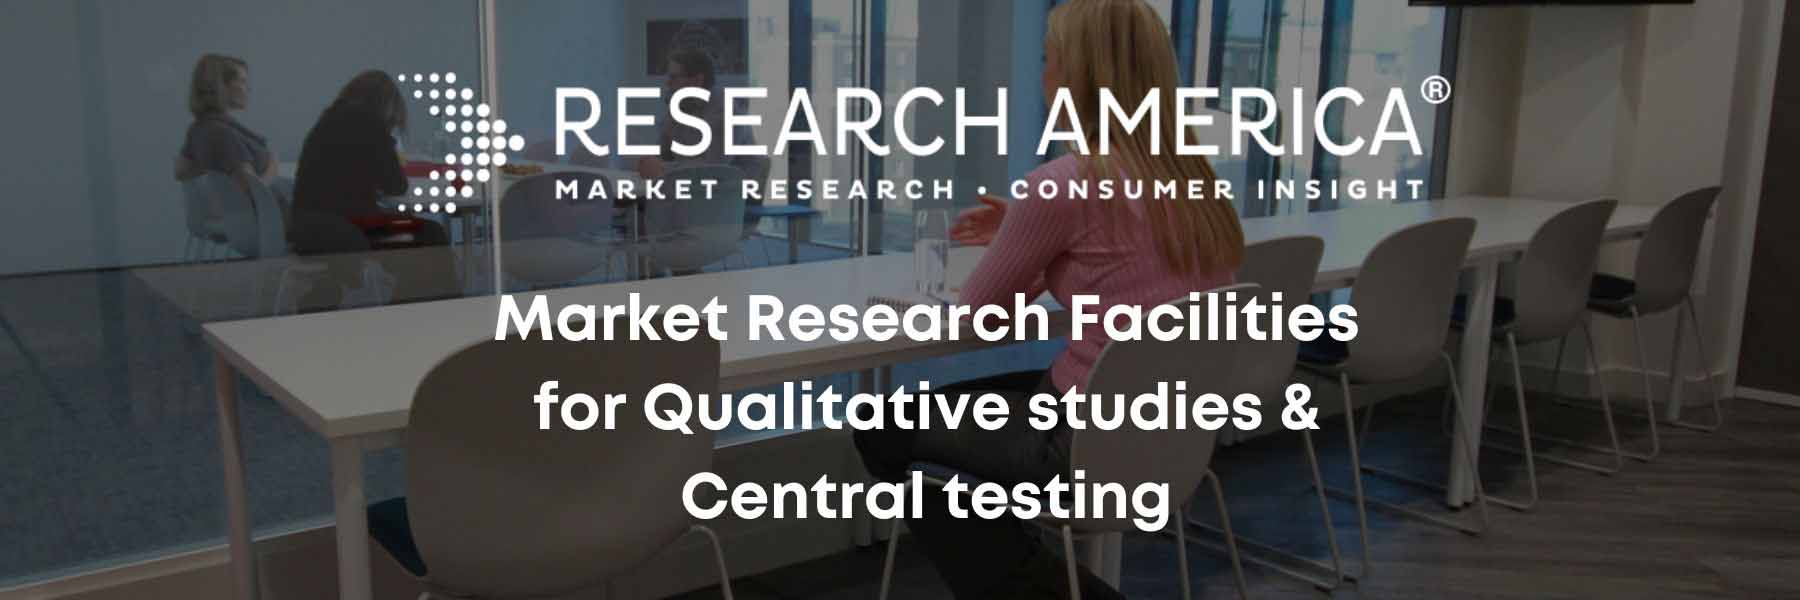 Market Research Facilities for Qualitative studies & Central testing